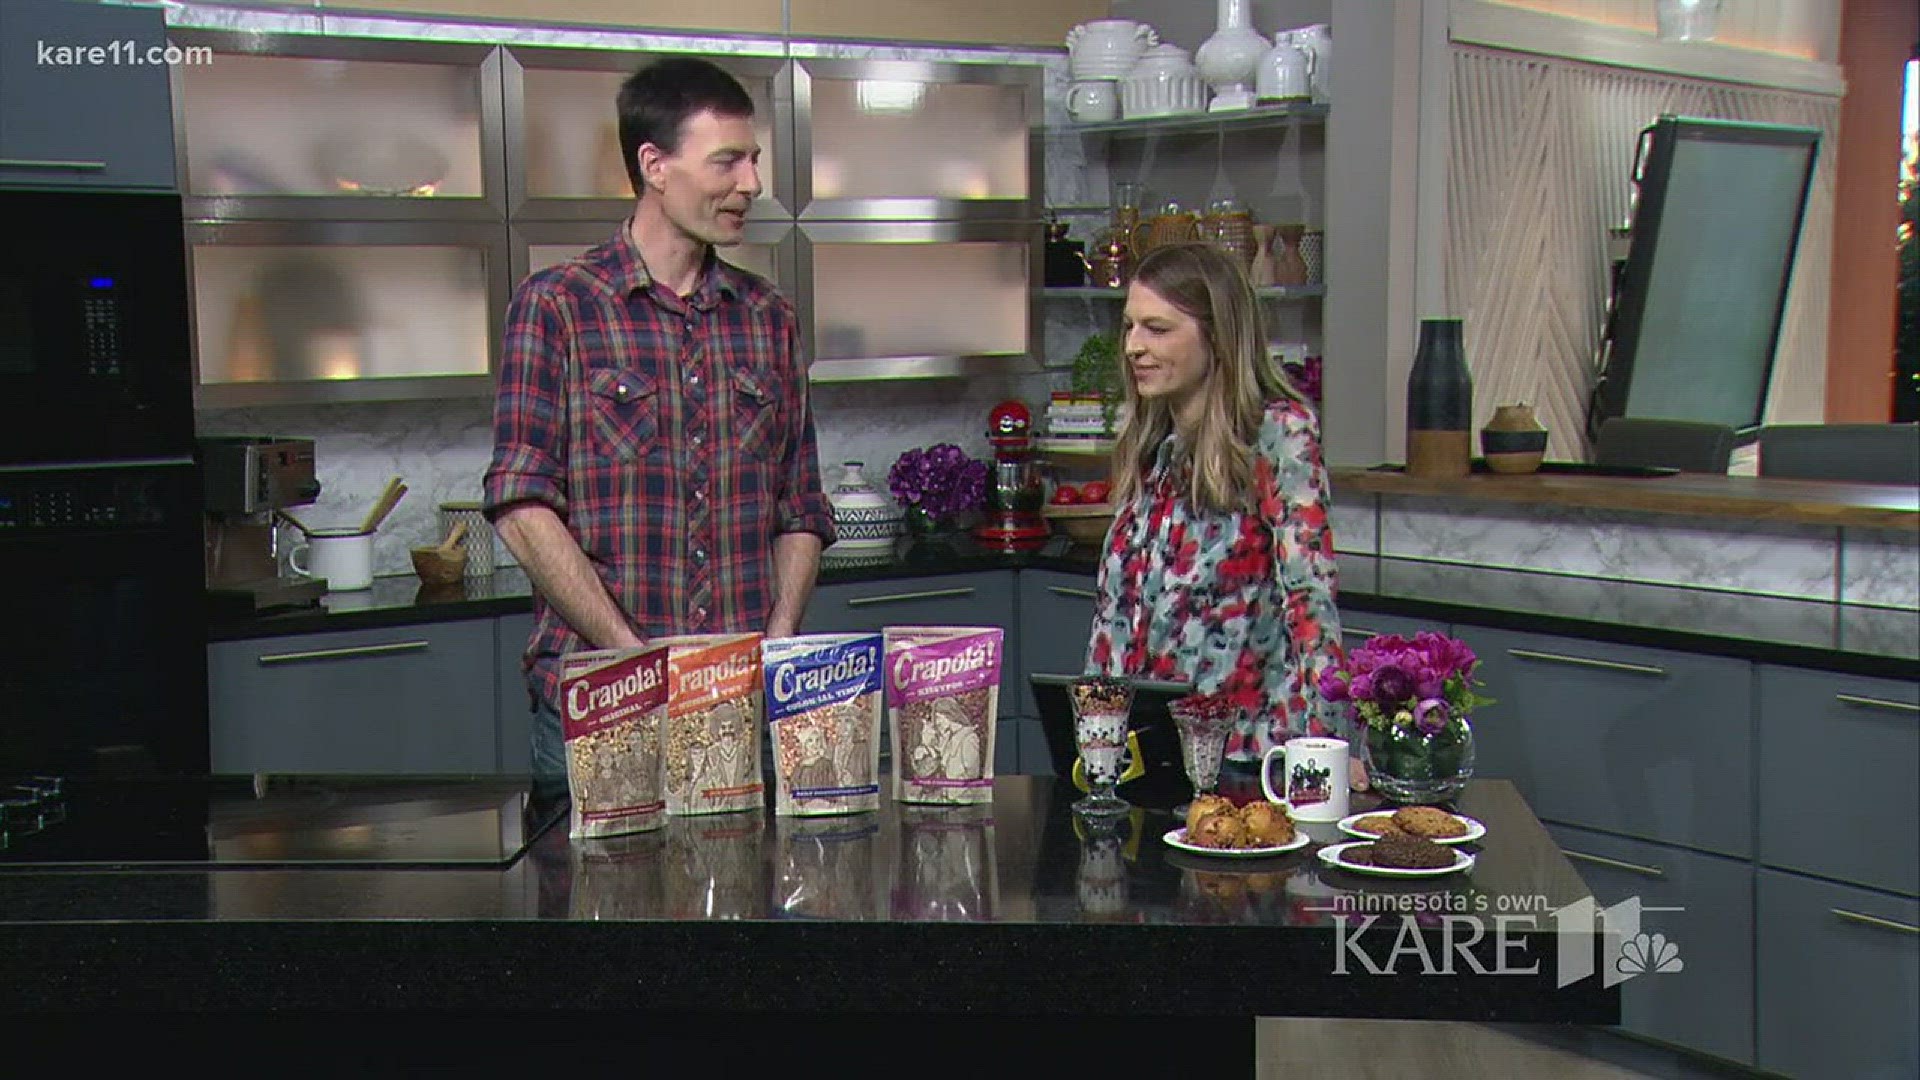 Crapola Granola's Brian Strom shares the story behind the Minnesota based company, and a few ways that you can use their granola in your kitchen.